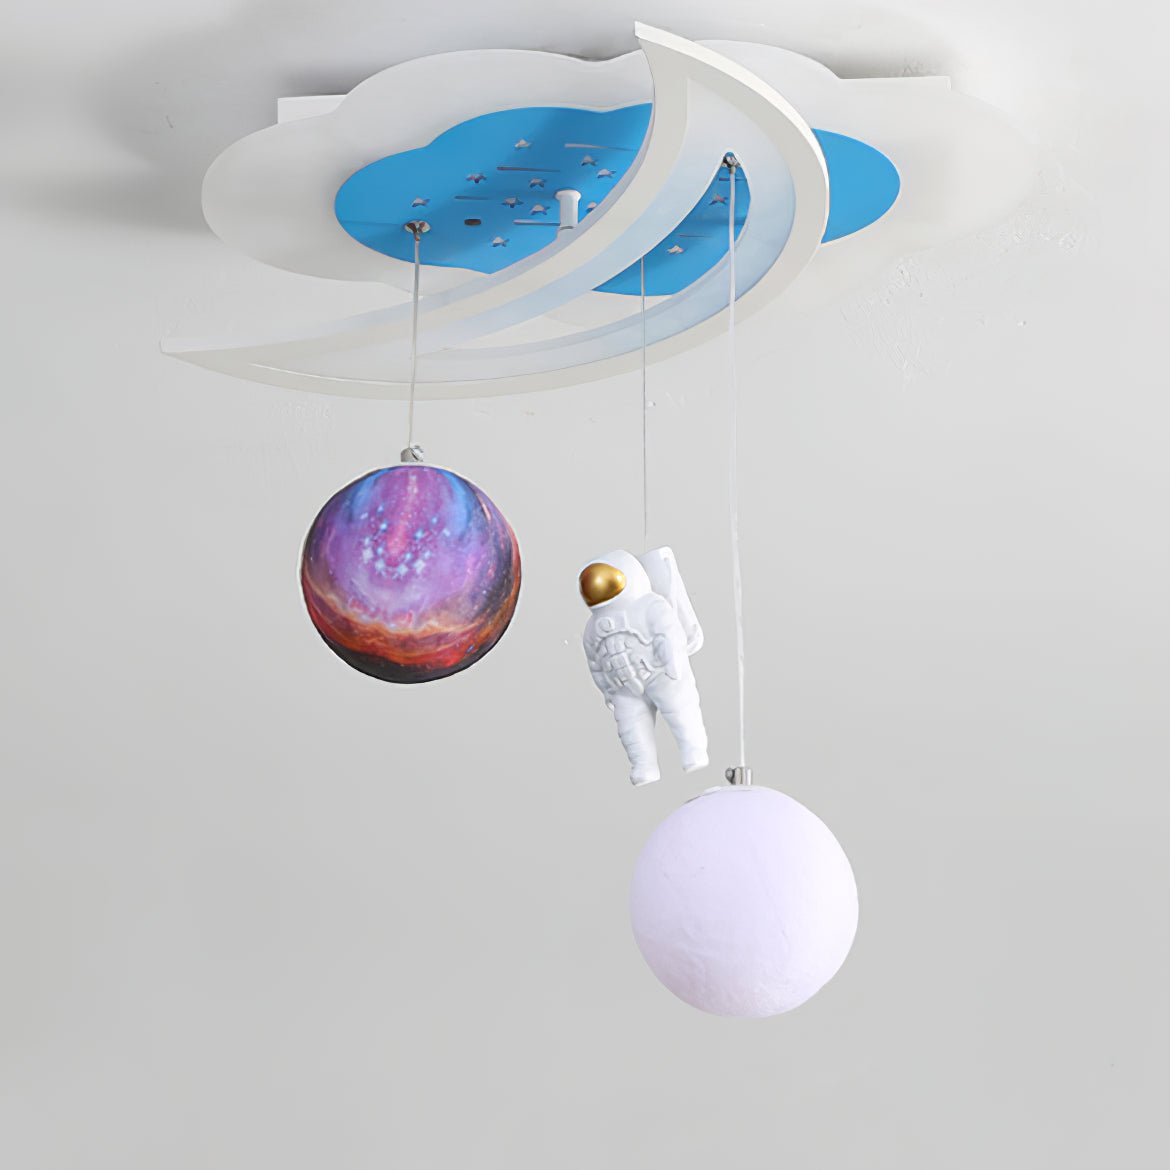 Space Astronaut Star Ceiling Lamp in White and Blue with Cool Light, measuring L 17.7″ x W 16.3″ x H 3.9″ (45cm x 41.5cm x 10cm)